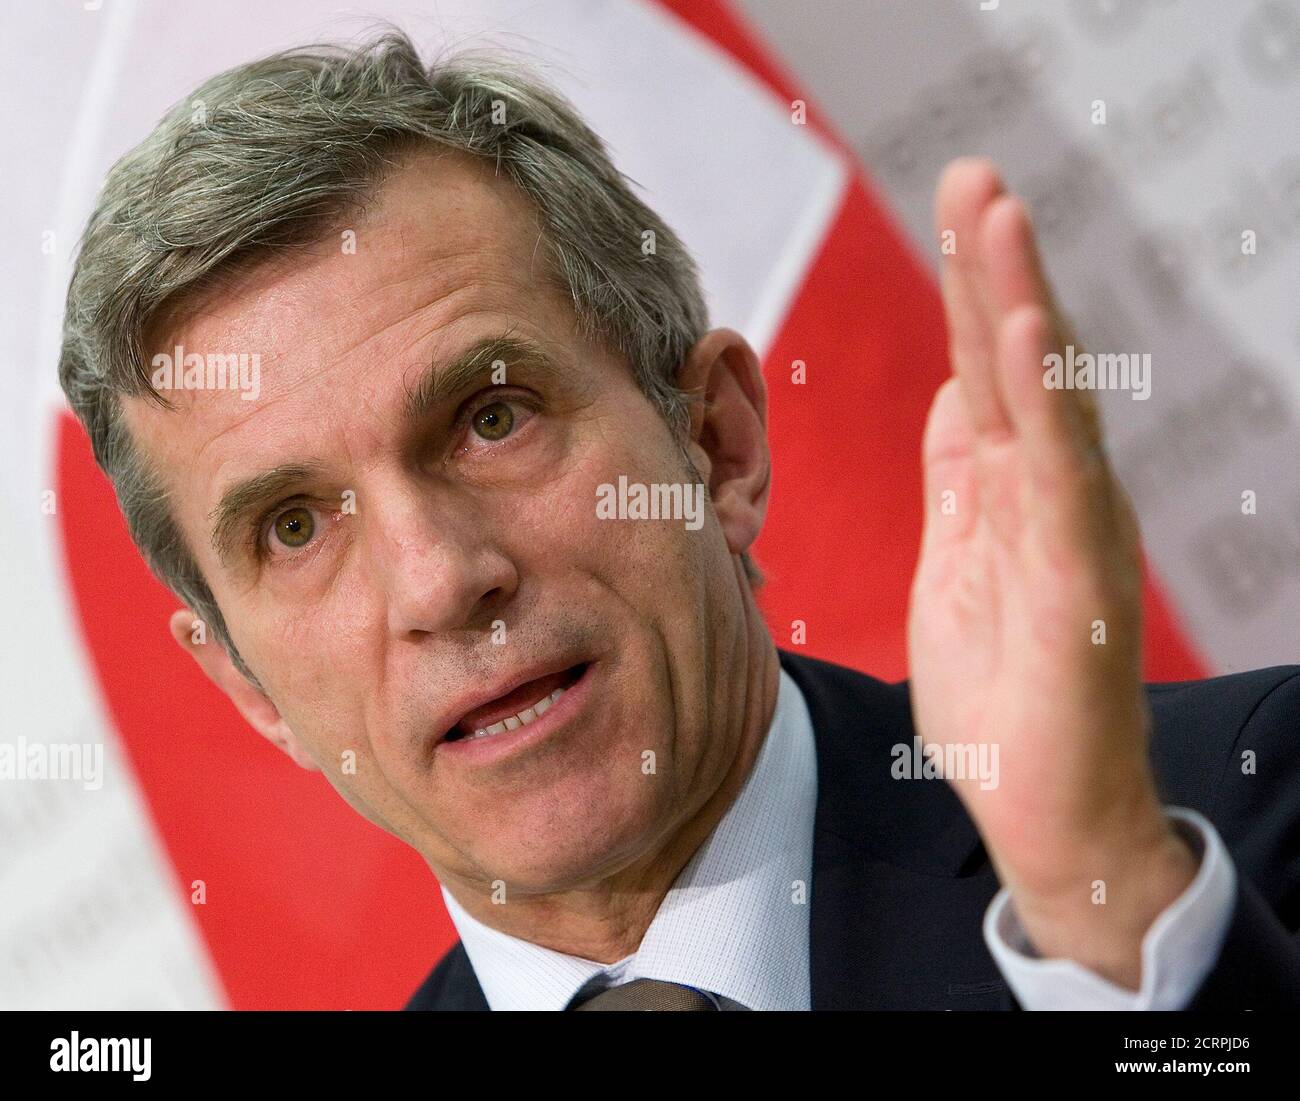 Thomas Zeltner, Director of the Federal Office of Public Health (BAG) gestures during a news conference on the popular vote ' Yes to the complementary medicine' ('Ja zur Komplementaermedizin') in Bern April 9, 2009. REUTERS/Pascal Lauener (SWITZERLAND POLITICS HEADSHOT) Stock Photo